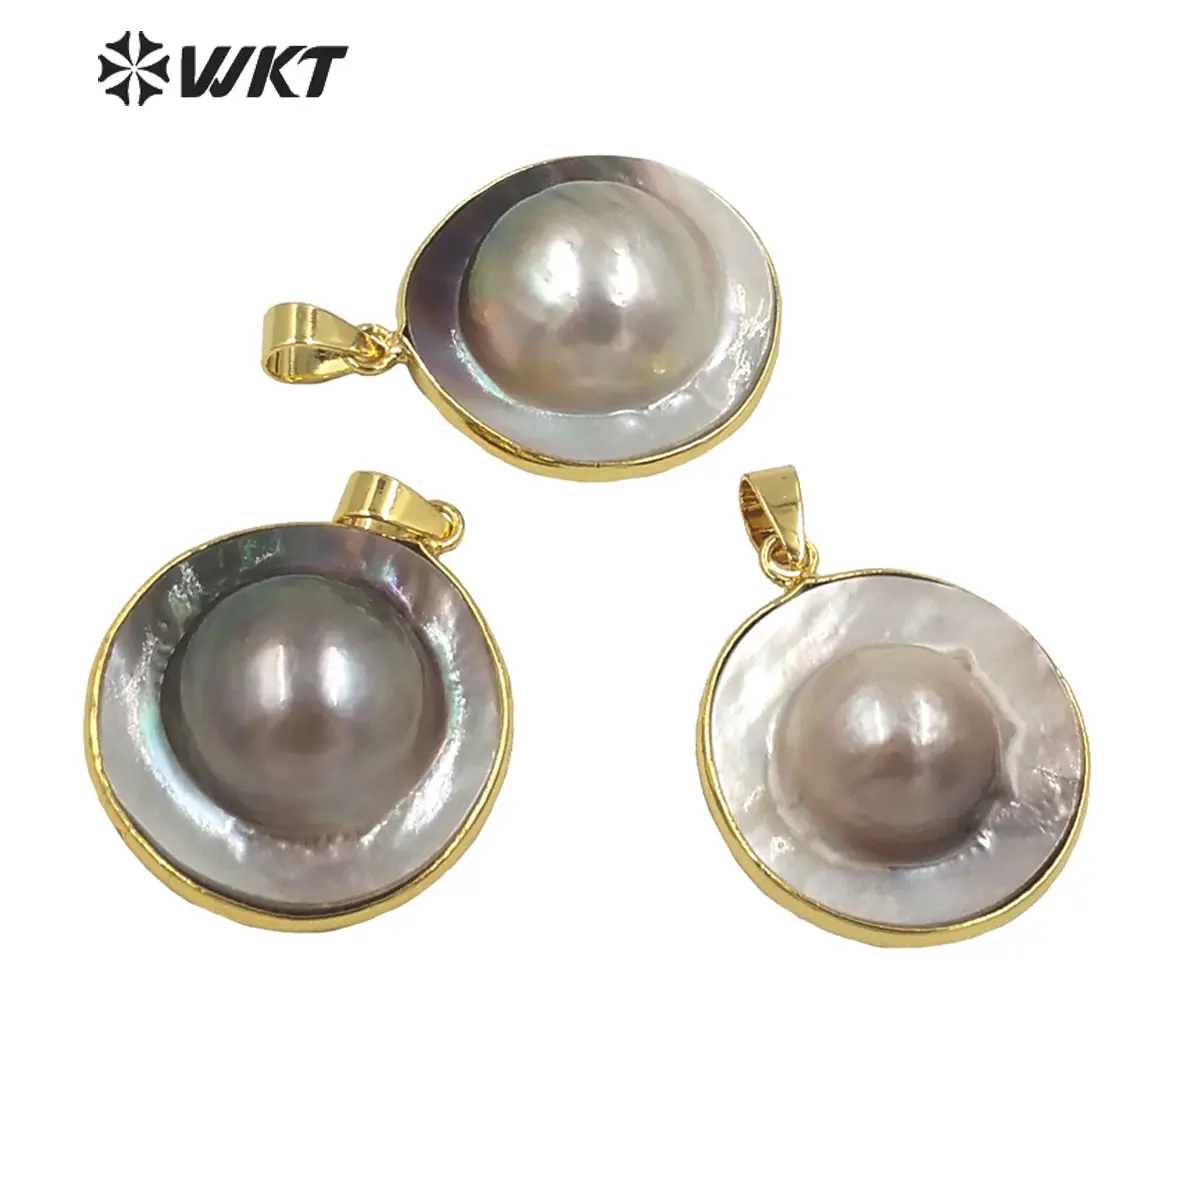 WT-JP290 Best Selling Round Mabe pendant Exquisite Cute Unique Petiteclassic Earrings Ladies Jewelry Gift Shell Earrings